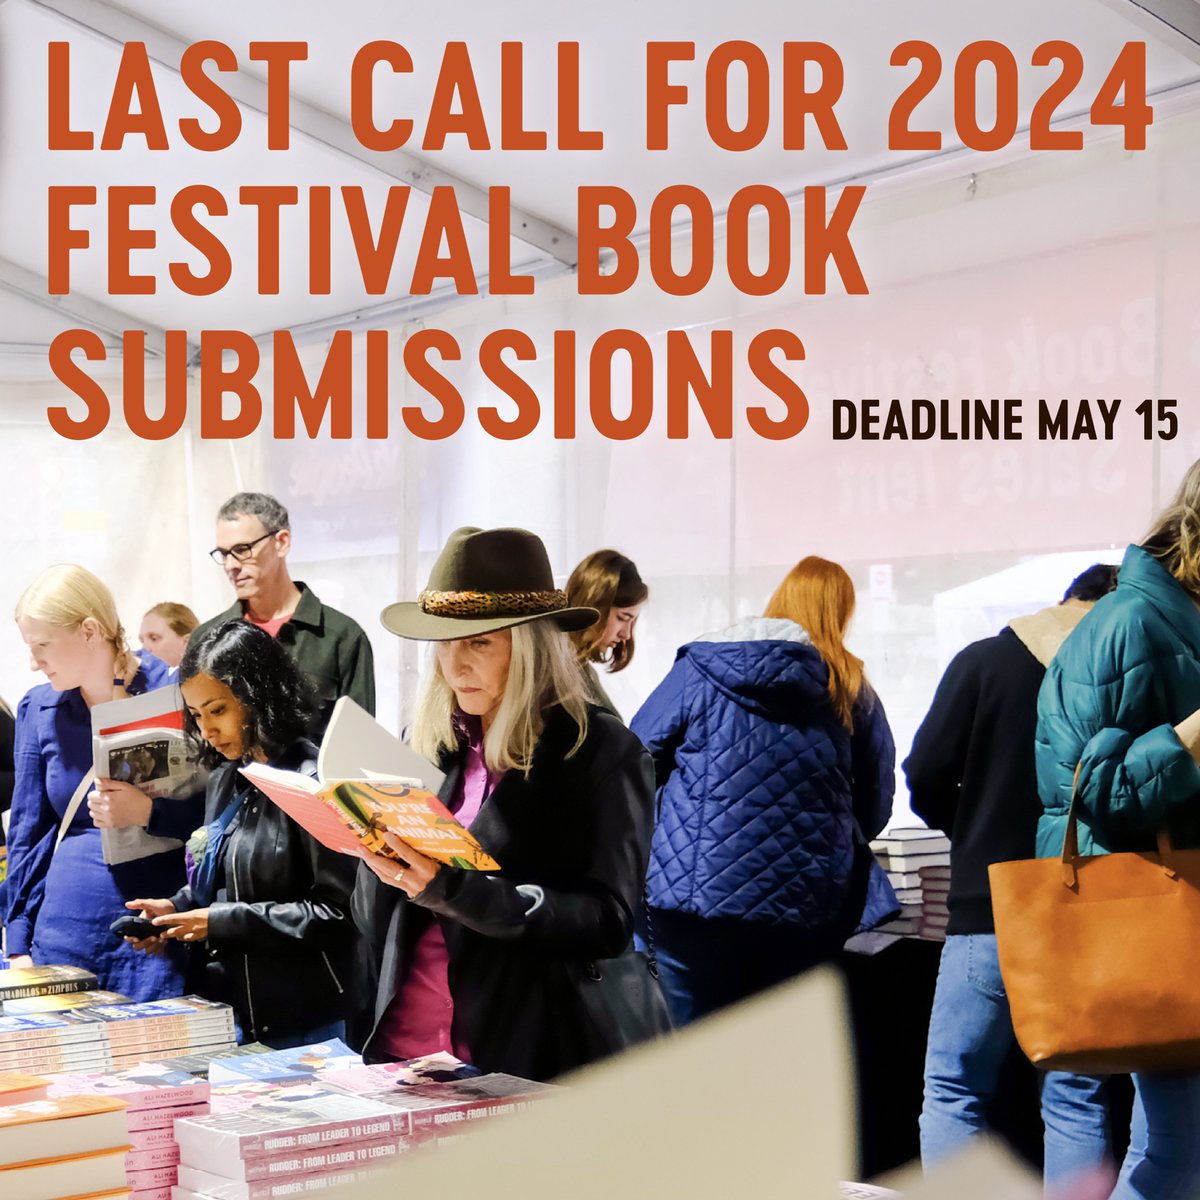 The window to submit featured authors for consideration at the 2024 Texas Book Festival closes on Wednesday, May 15, 2024. Submissions are reviewed on a rolling basis. Go to texasbookfestival.org for full details and to submit. 💫 📚